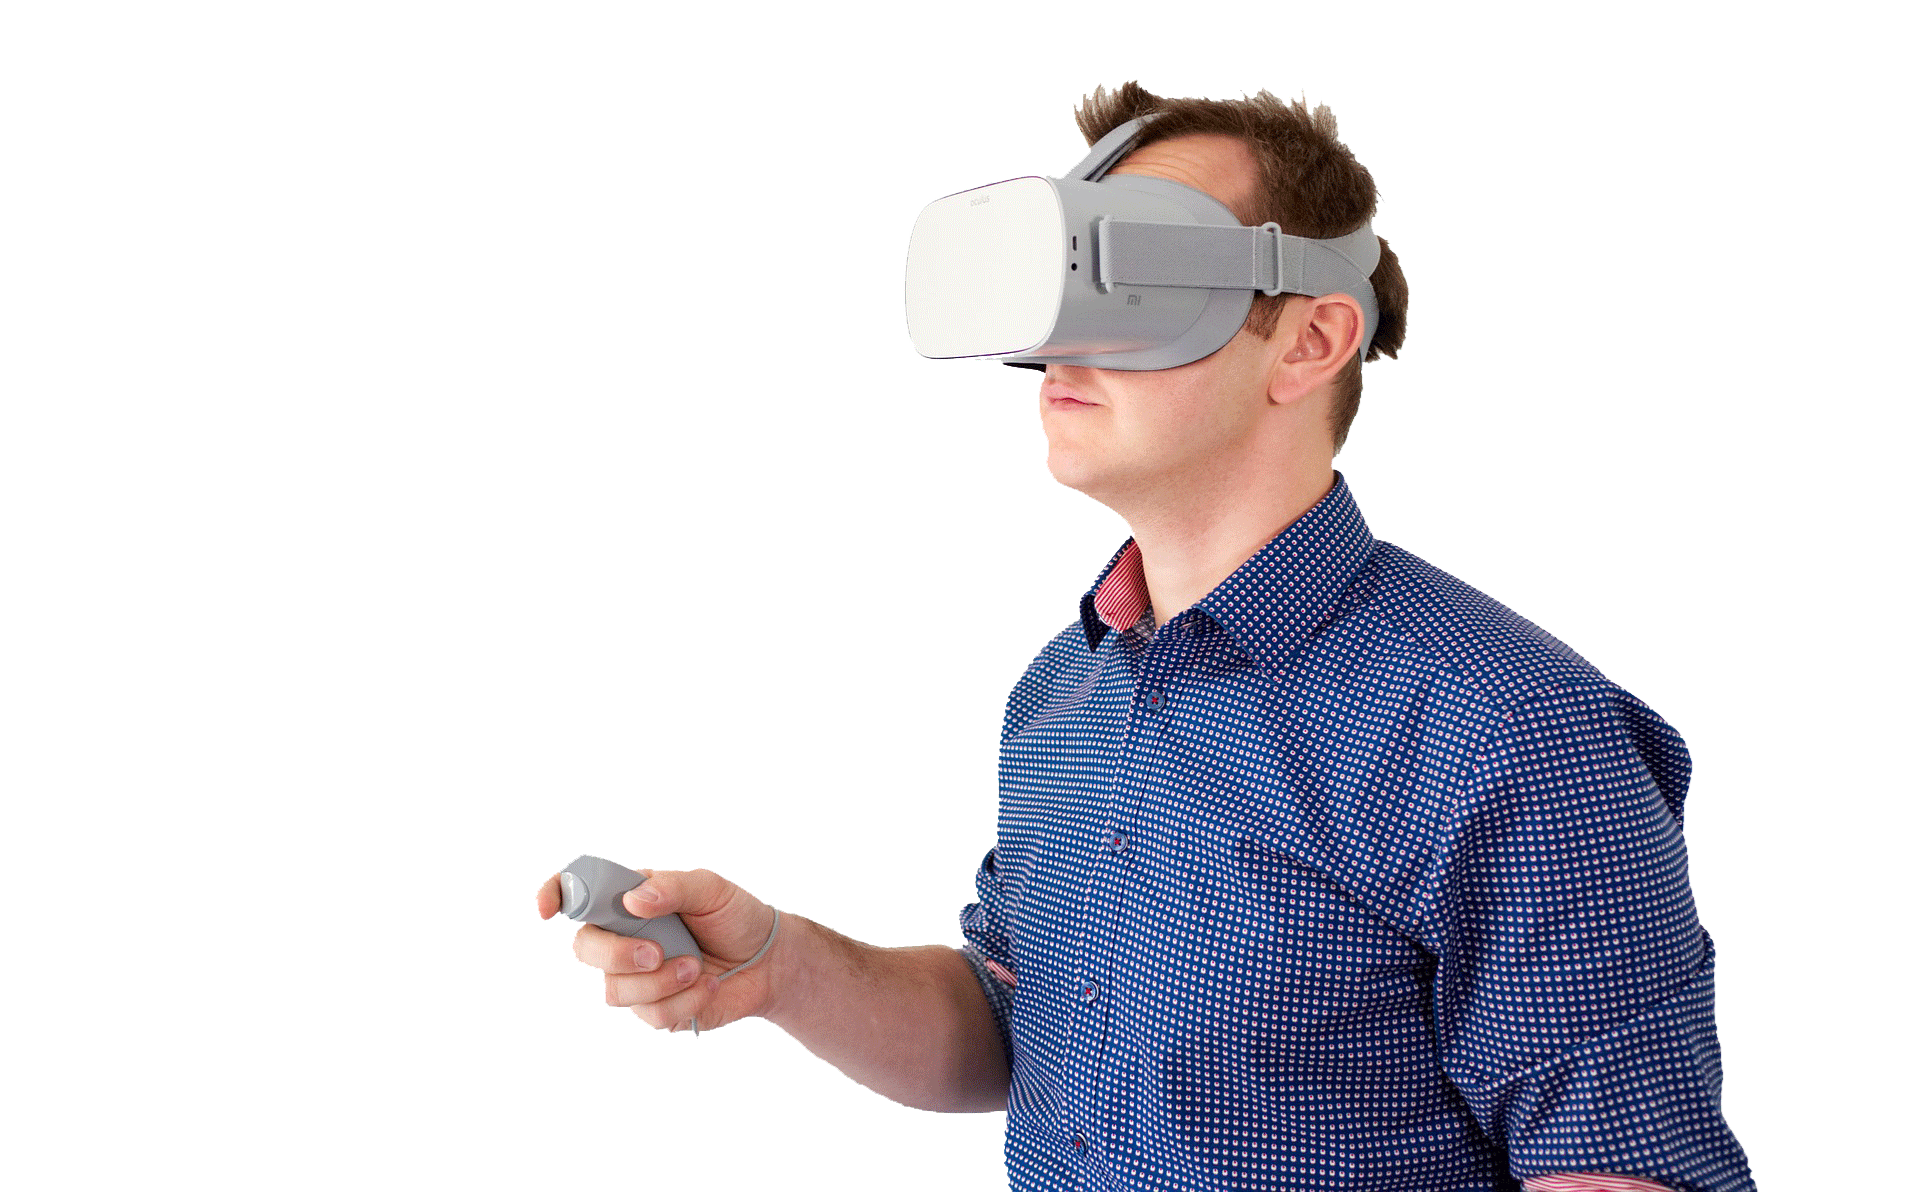 A picture of a man wearing a virtual reality headset and holding a controller